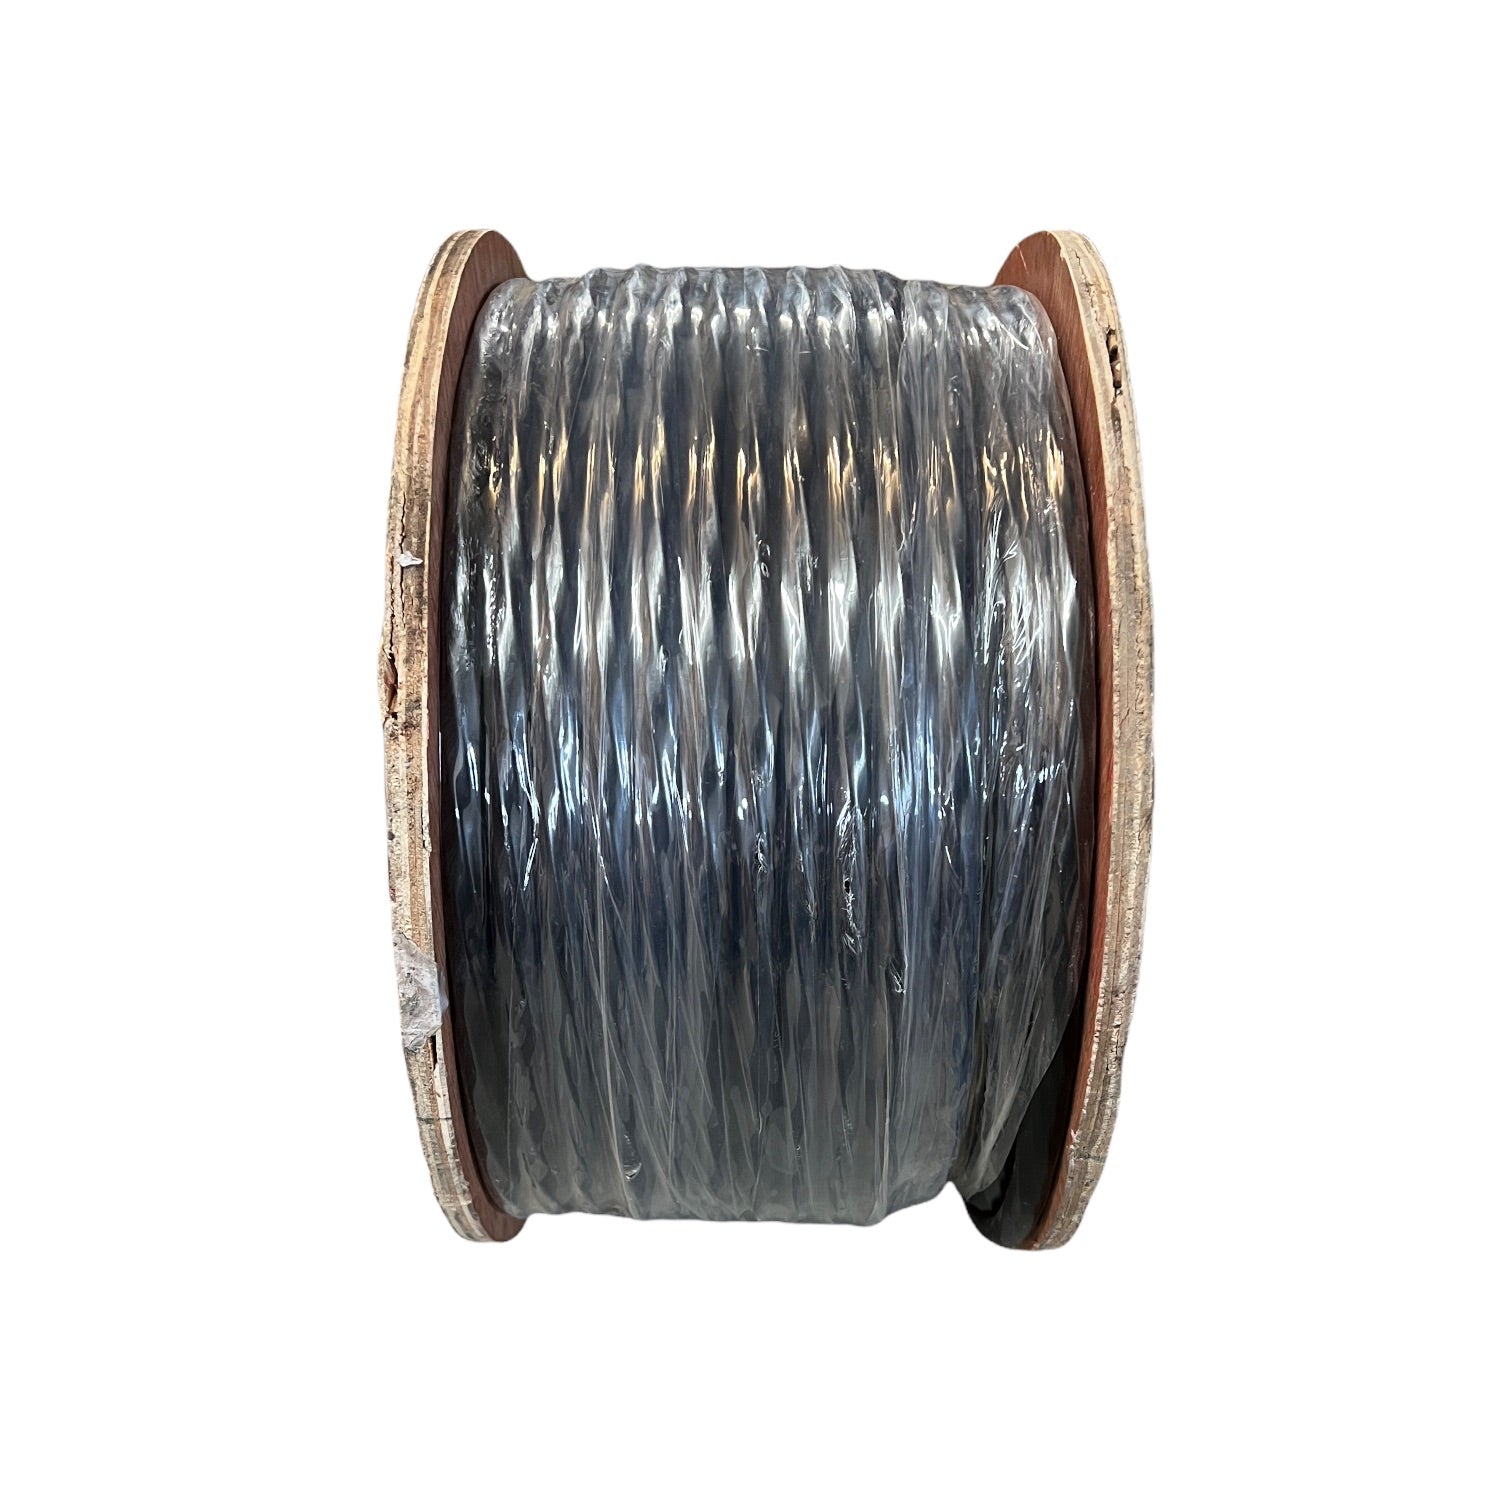 18/9X1000 - Multi-Conductor Irrigation Control Wire, 18 awg, 18/9 X 1000 ft